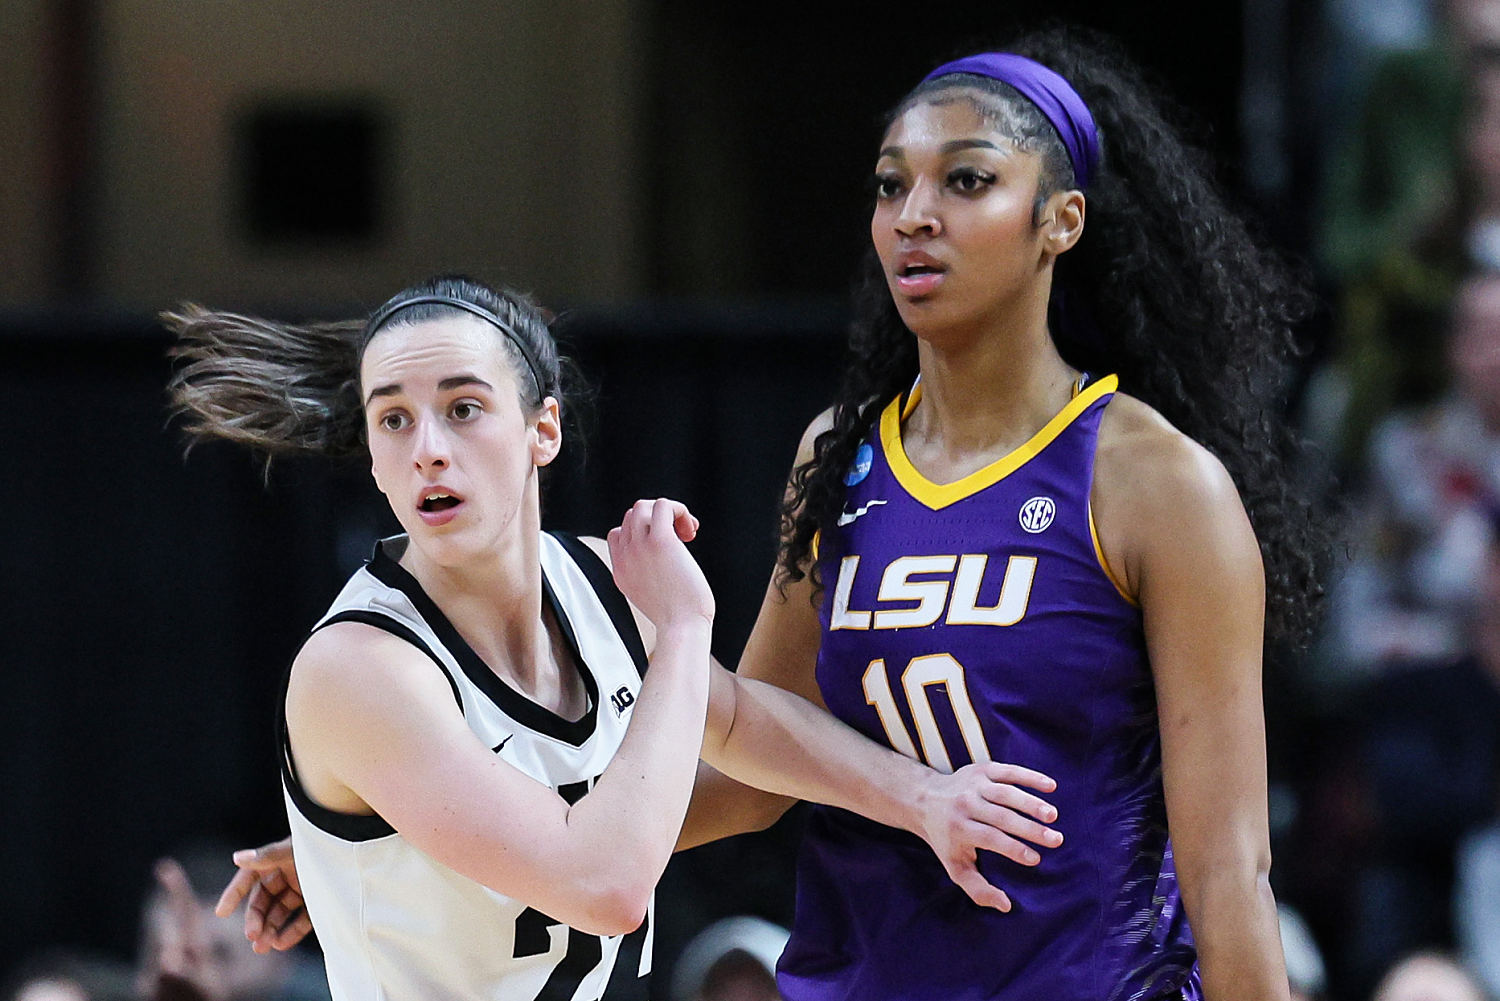 Caitlin Clark and Angel Reese headline one of the most anticipated WNBA drafts in years